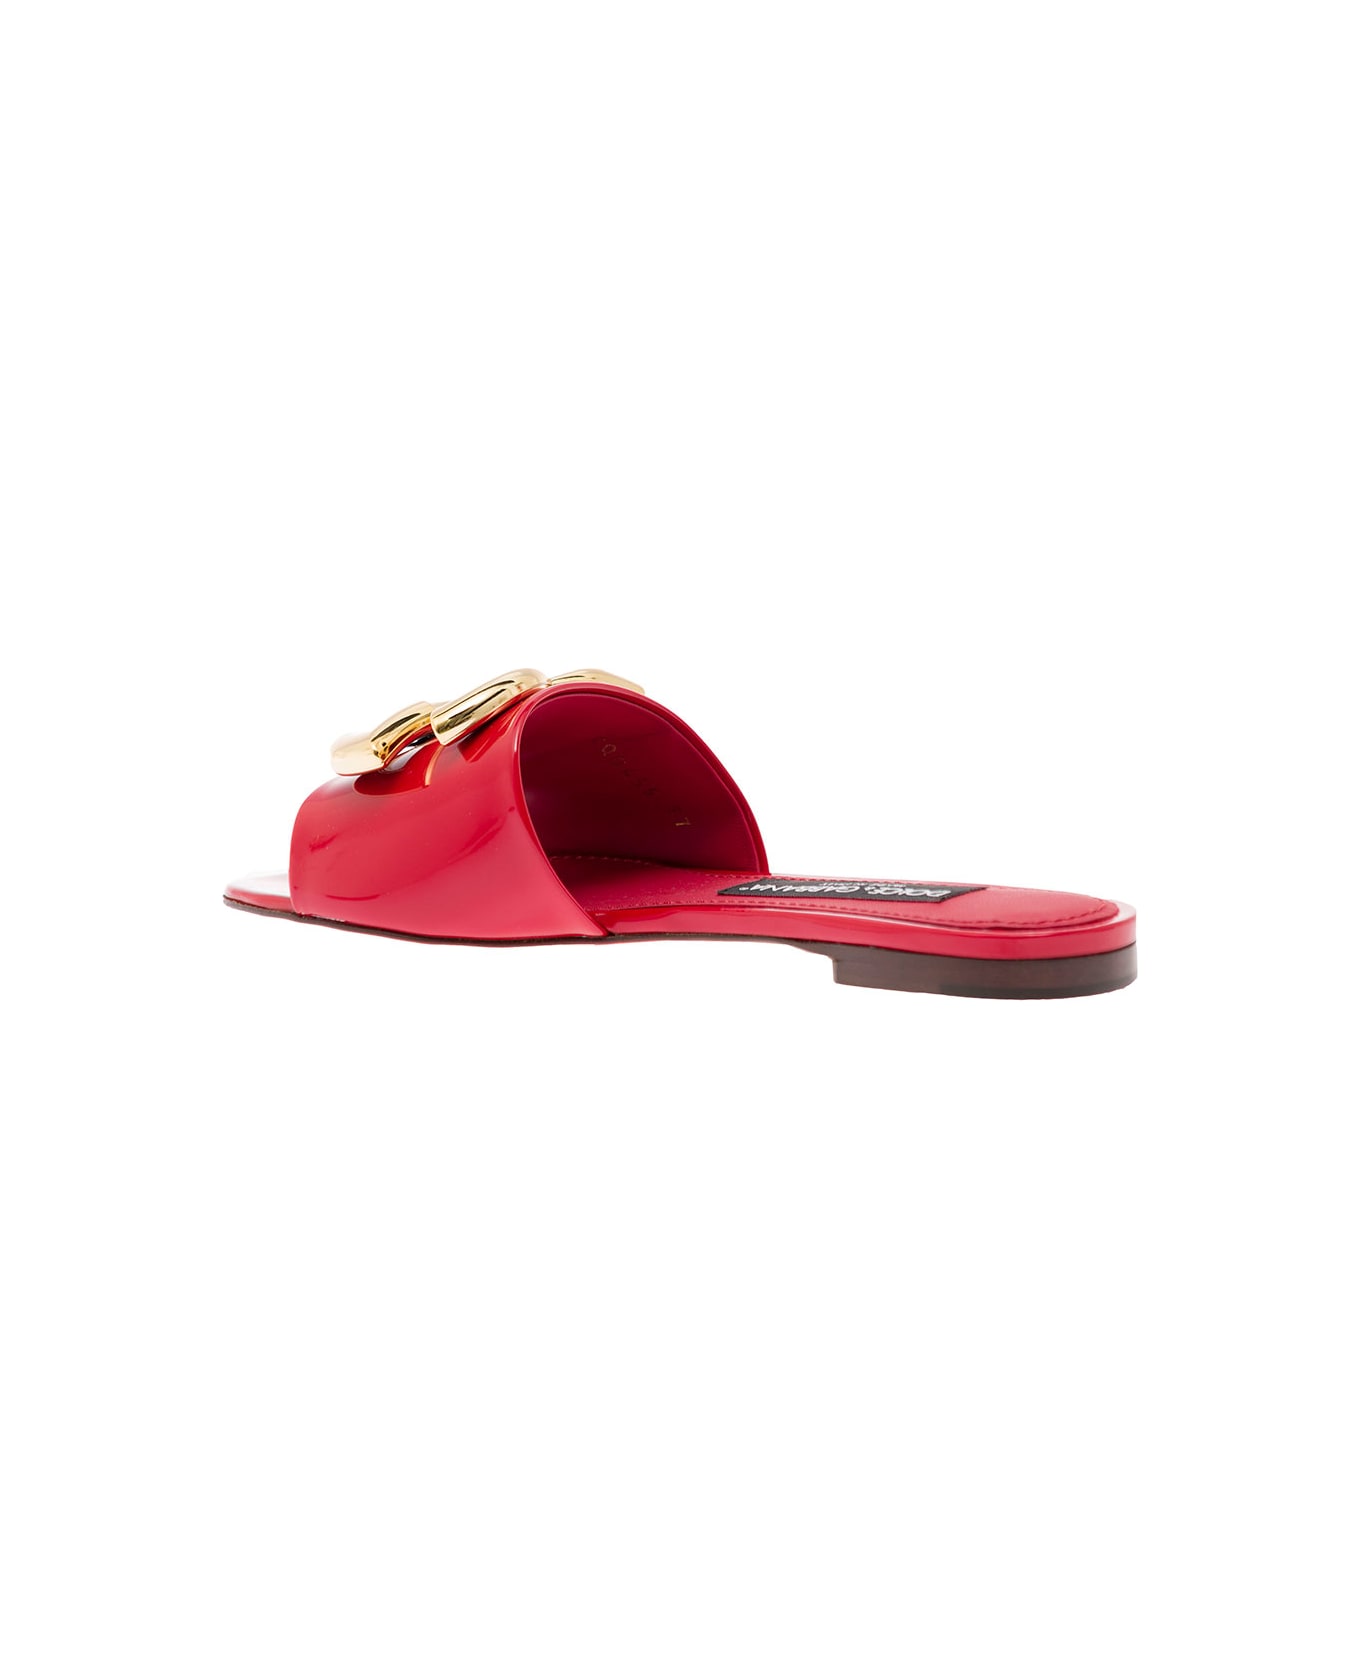 Dolce & Gabbana Red Sliders With Metal Dg Logo In Polished Leather Woman - Red